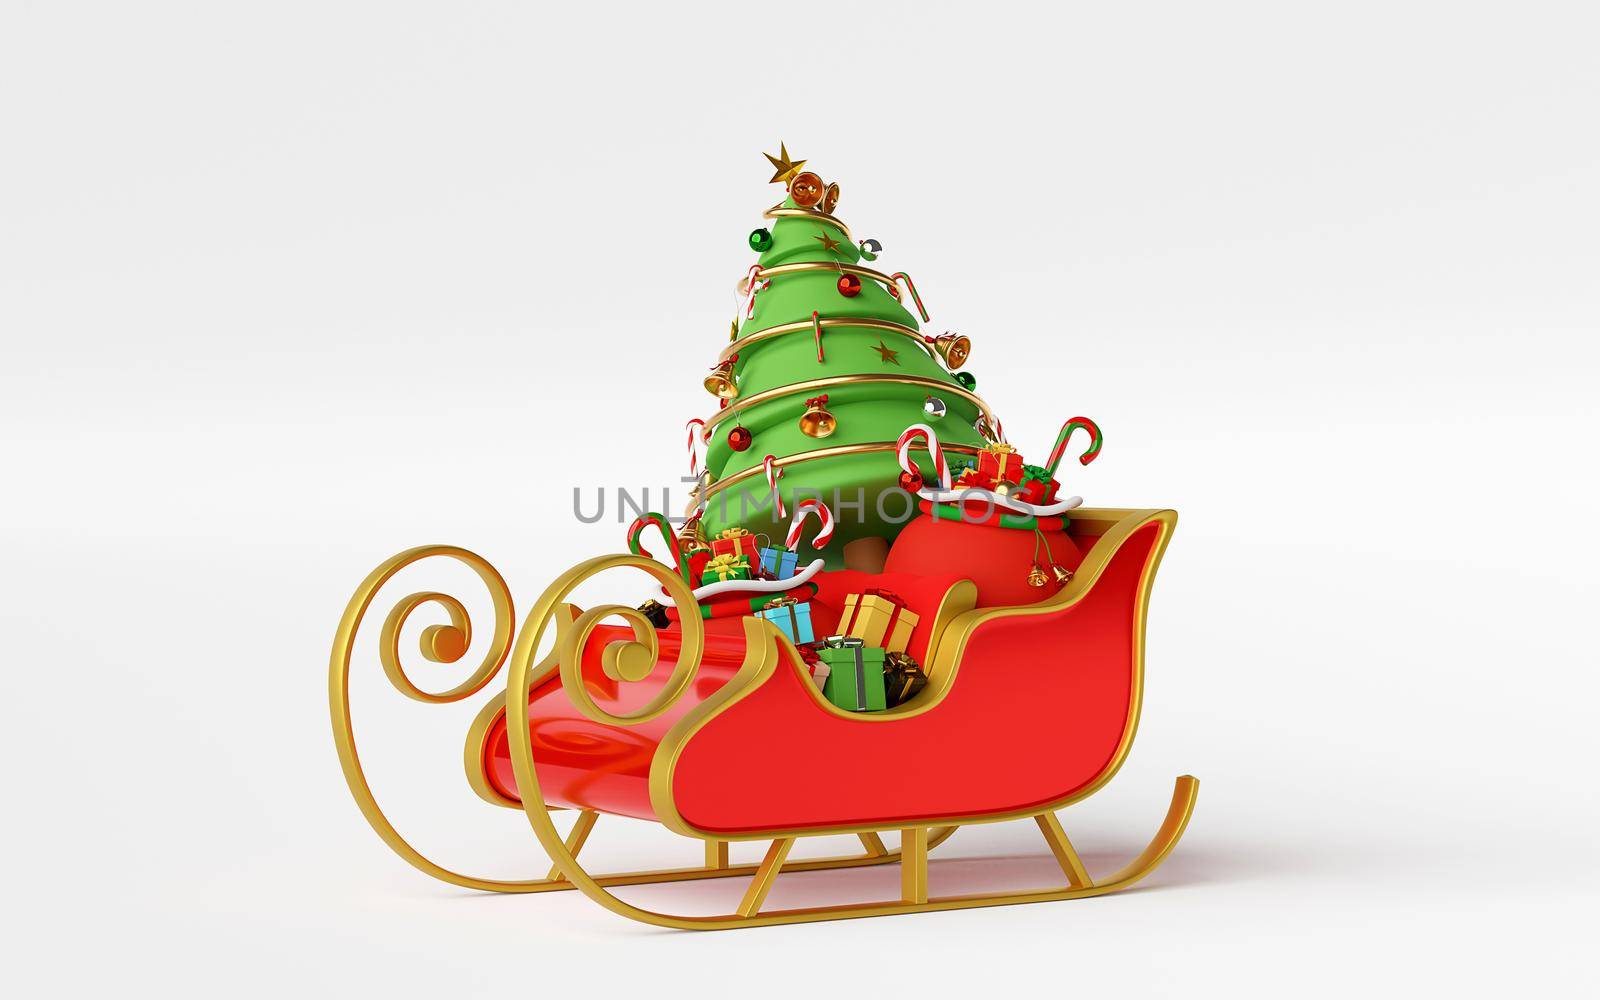 Scene of Sleigh full of Christmas gifts and Christmas tree, 3d rendering